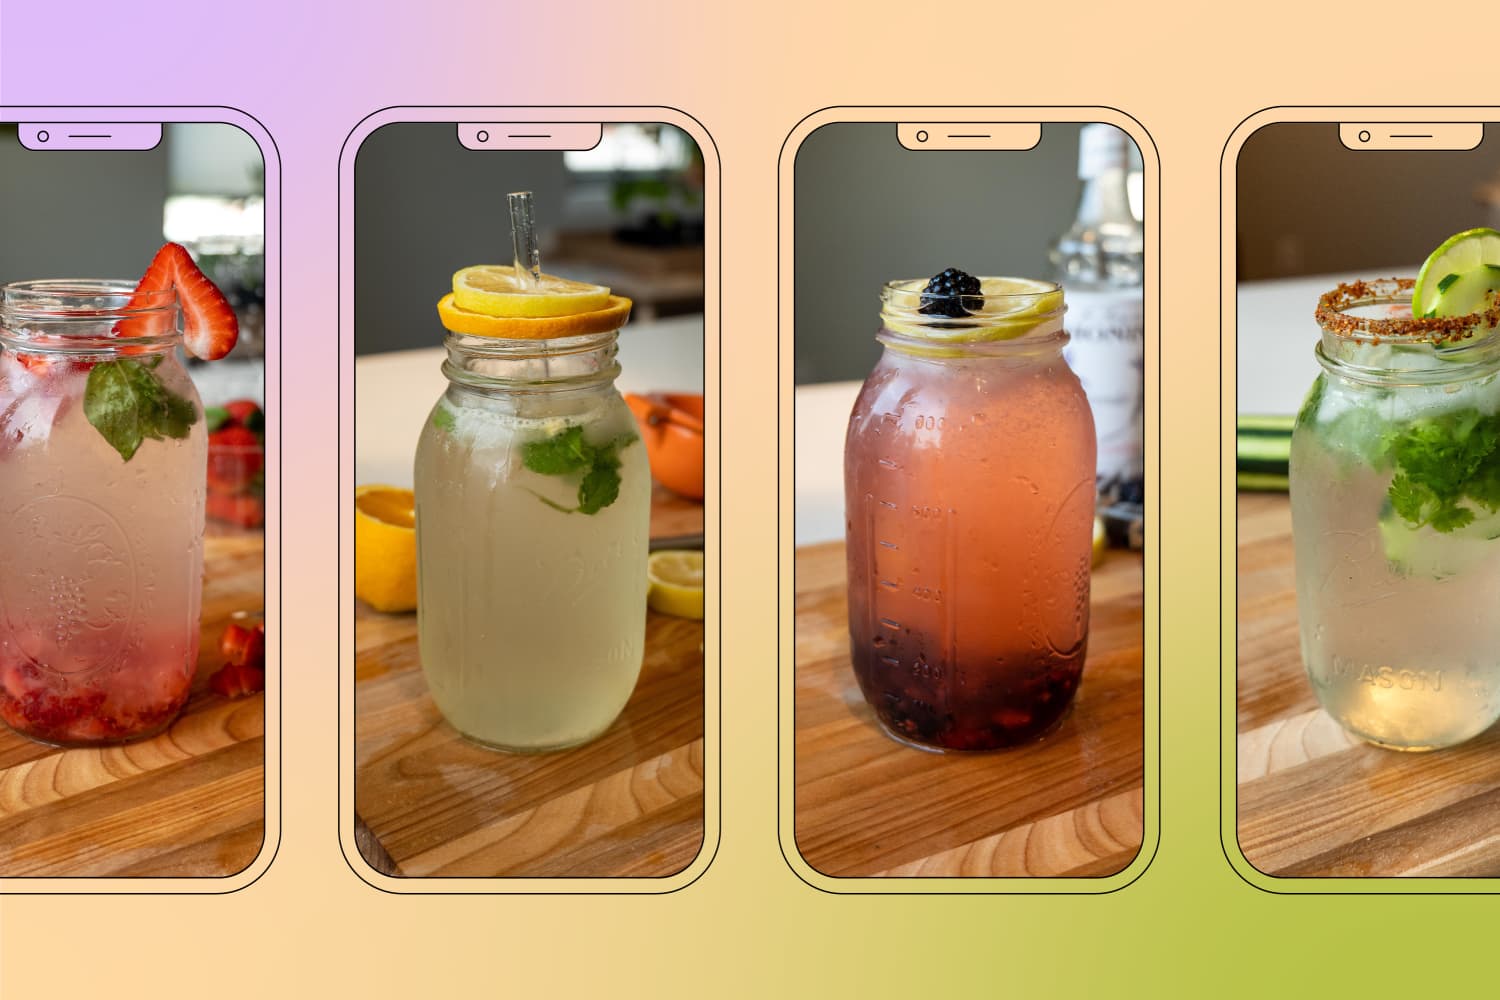 I Tried 4 Water “Recipes,” and They Make Staying Hydrated Refreshingly Simple